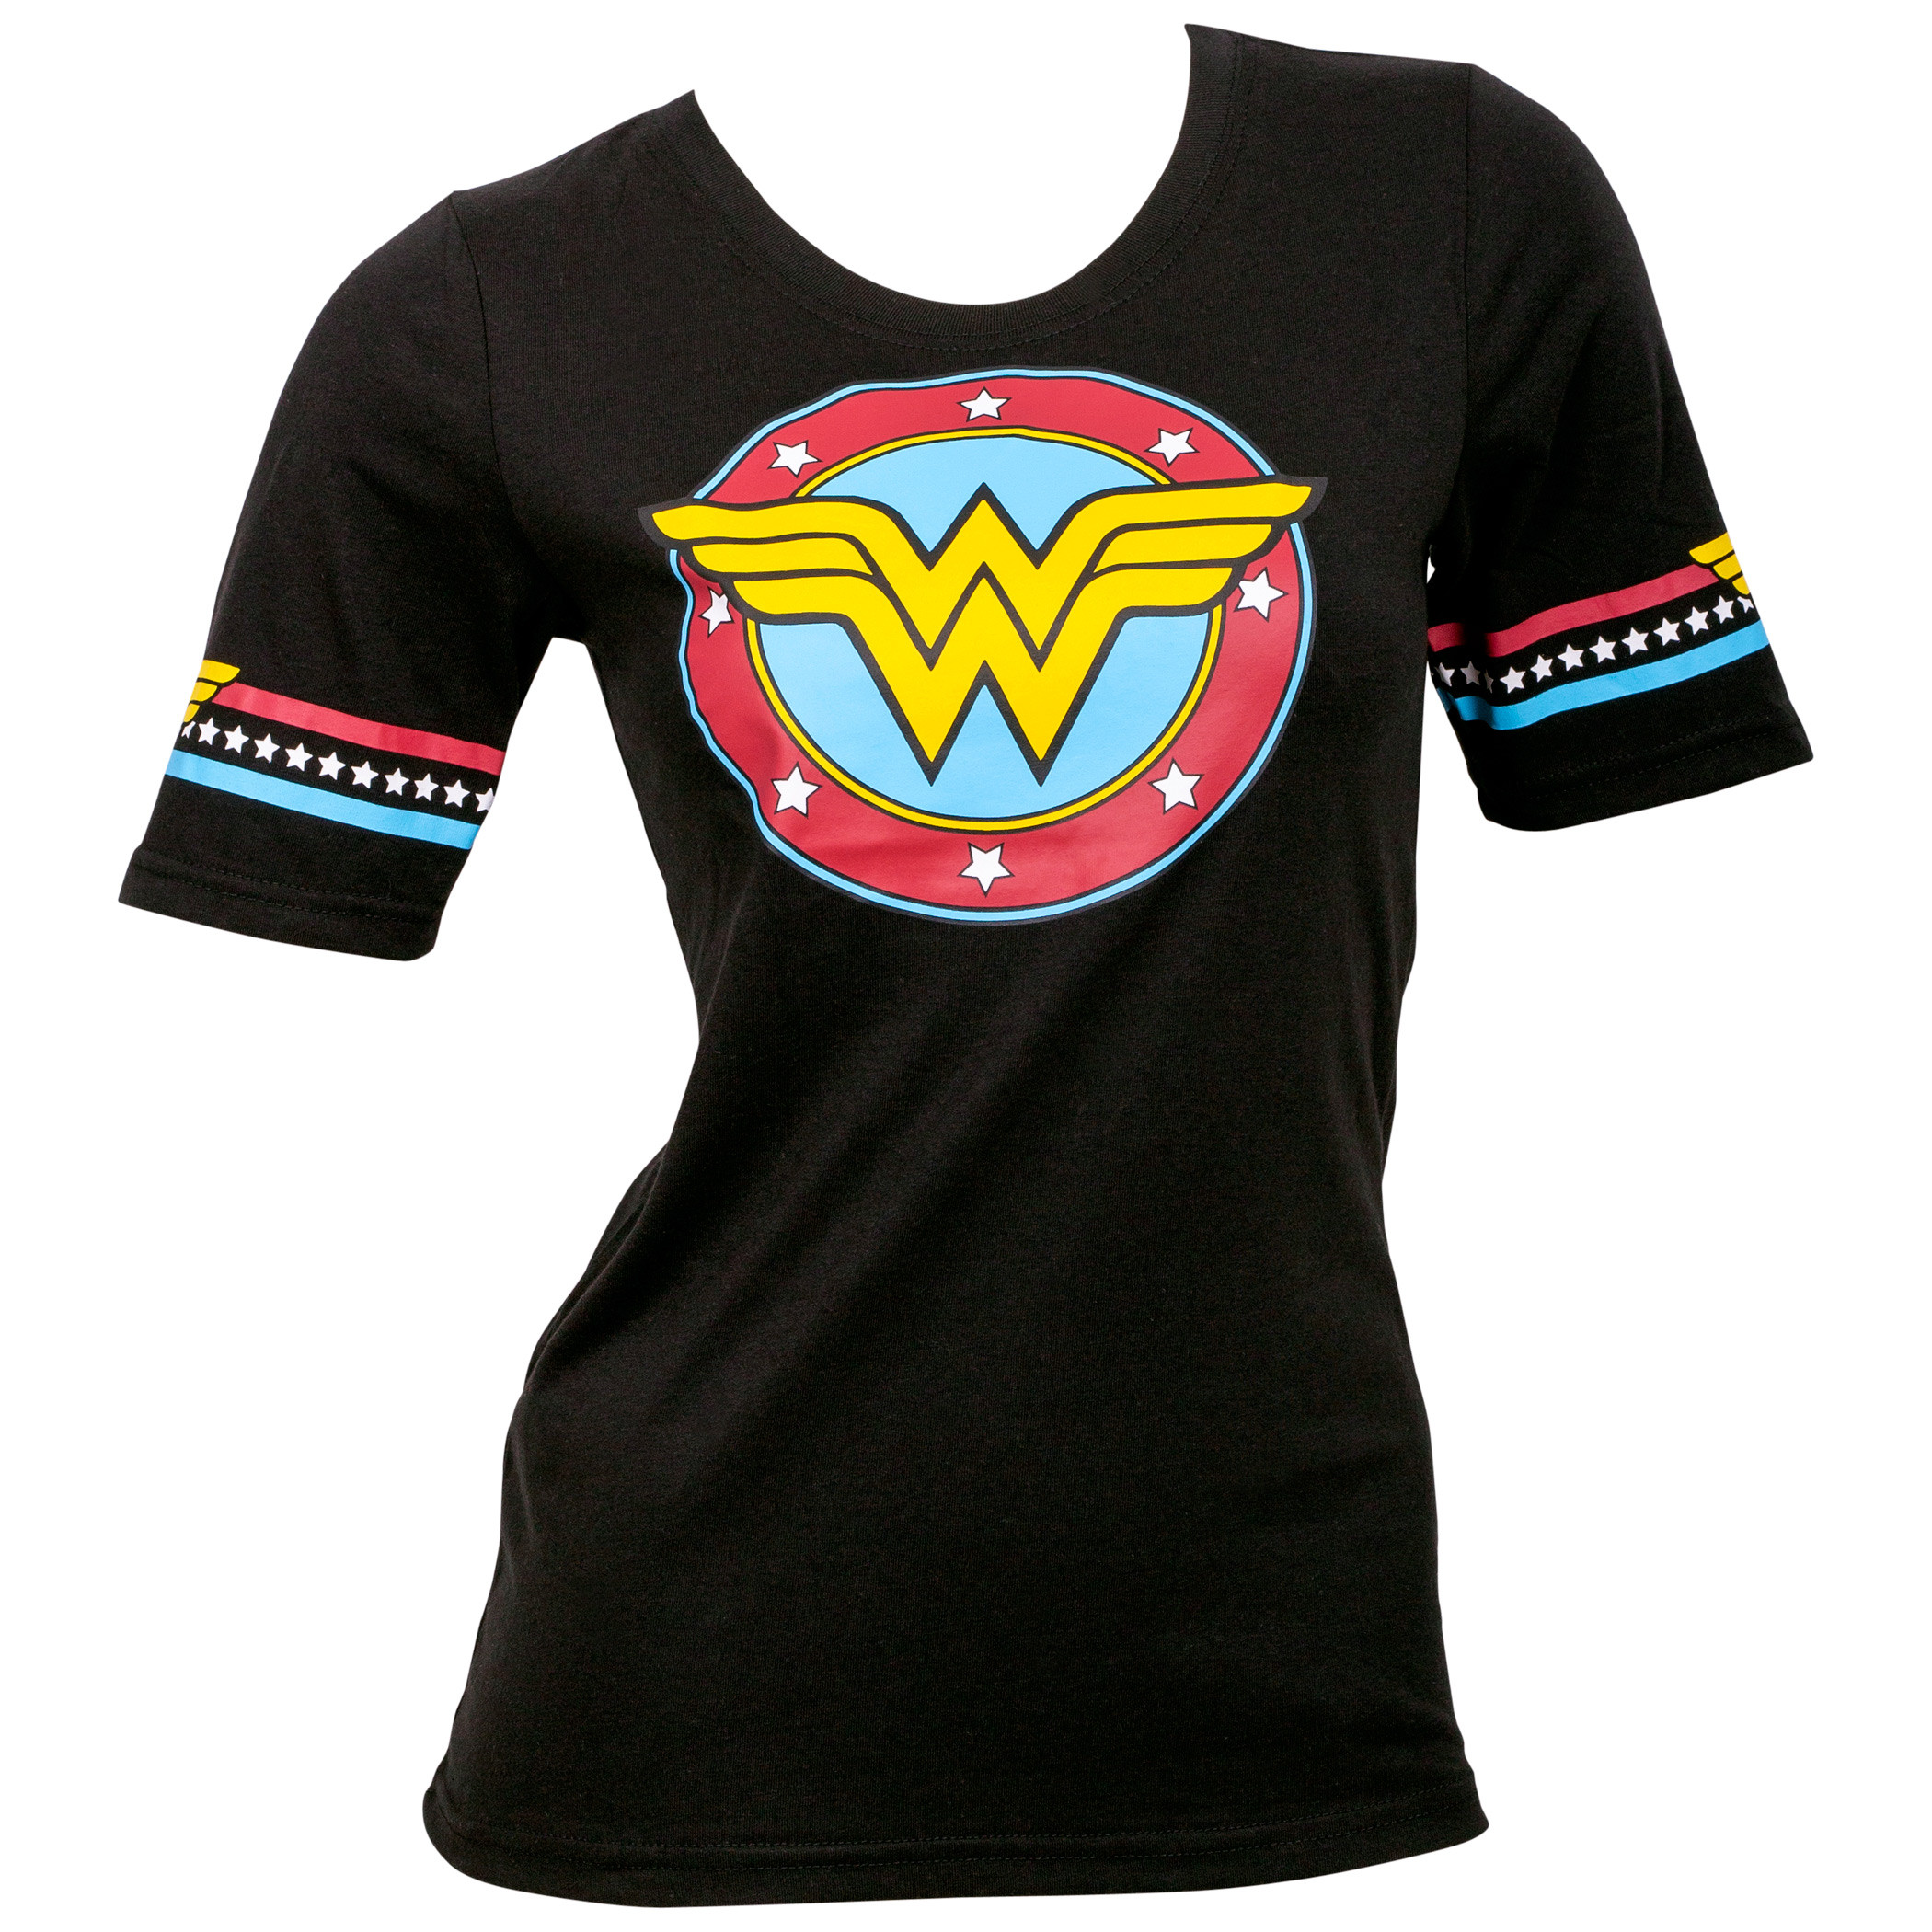 Wonder Woman Star Crest Front and Back Print Women's T-Shirt